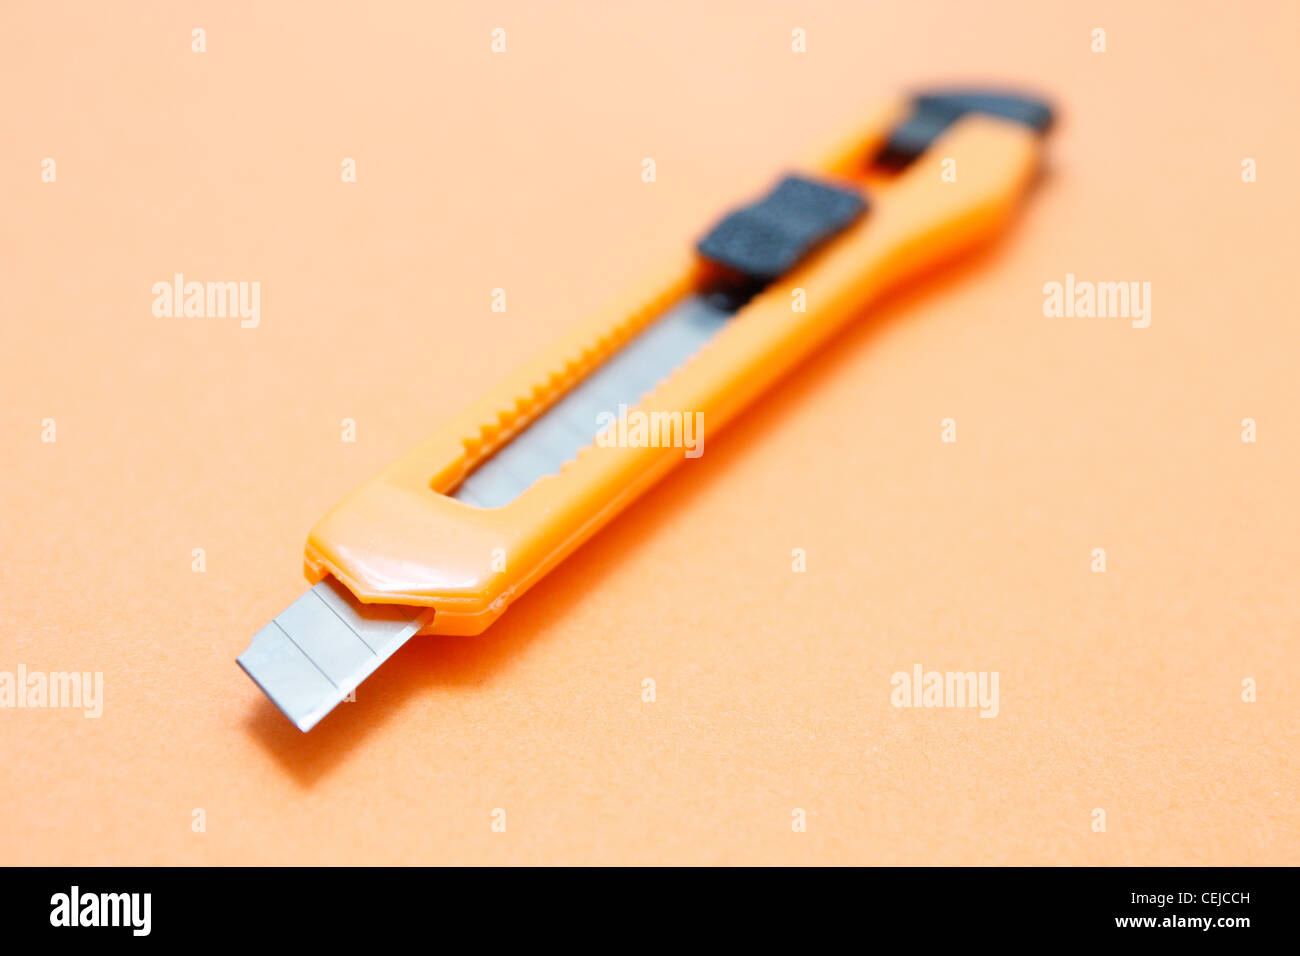 Paper knife Stock Photo